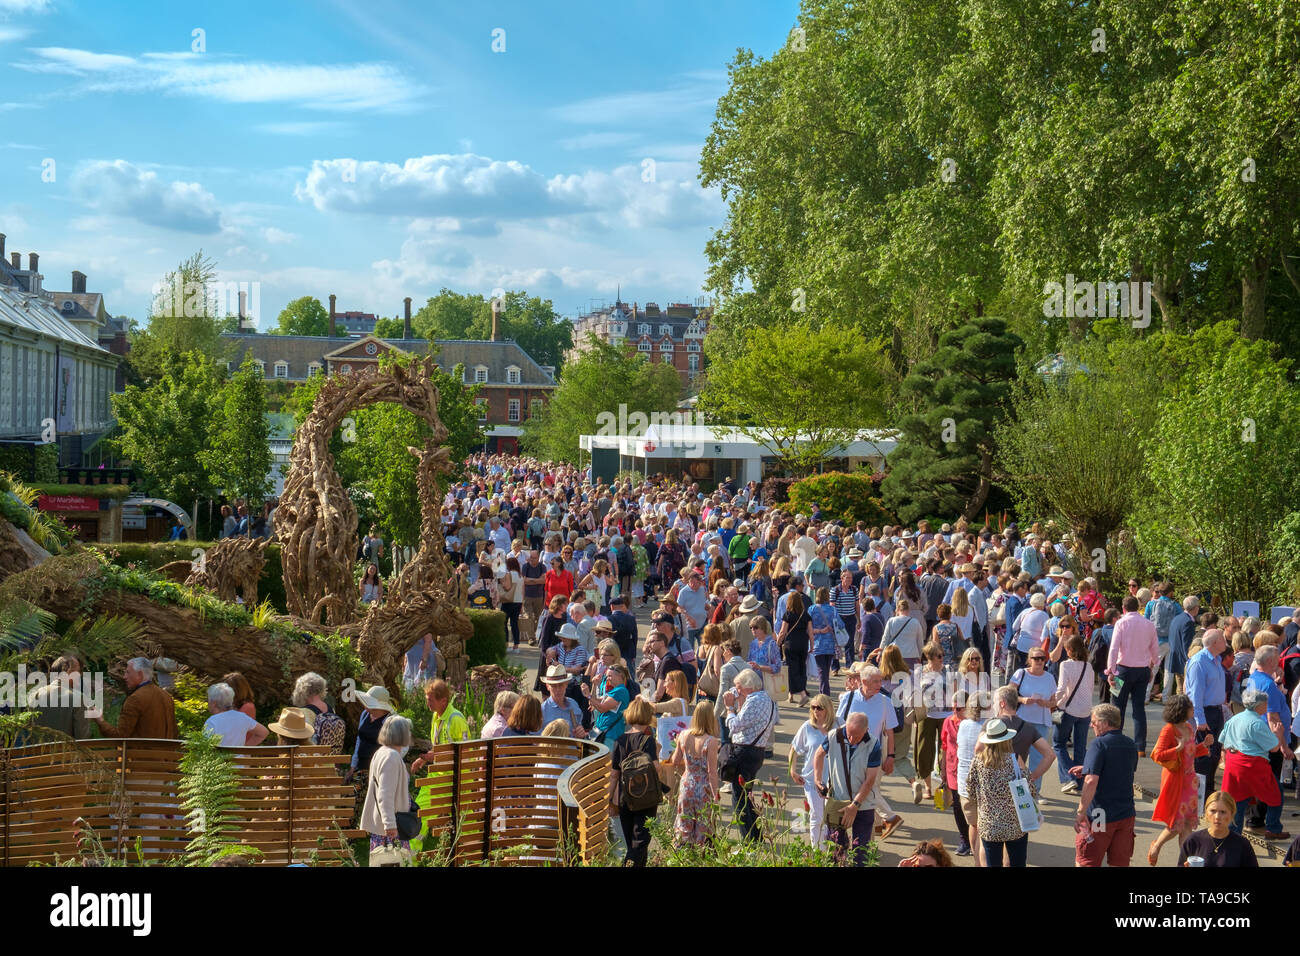 London, UK - May 22nd 2019: RHS Chelsea Flower Show, crowds of visitors make their way towards the gardens and refreshment areas. Stock Photo